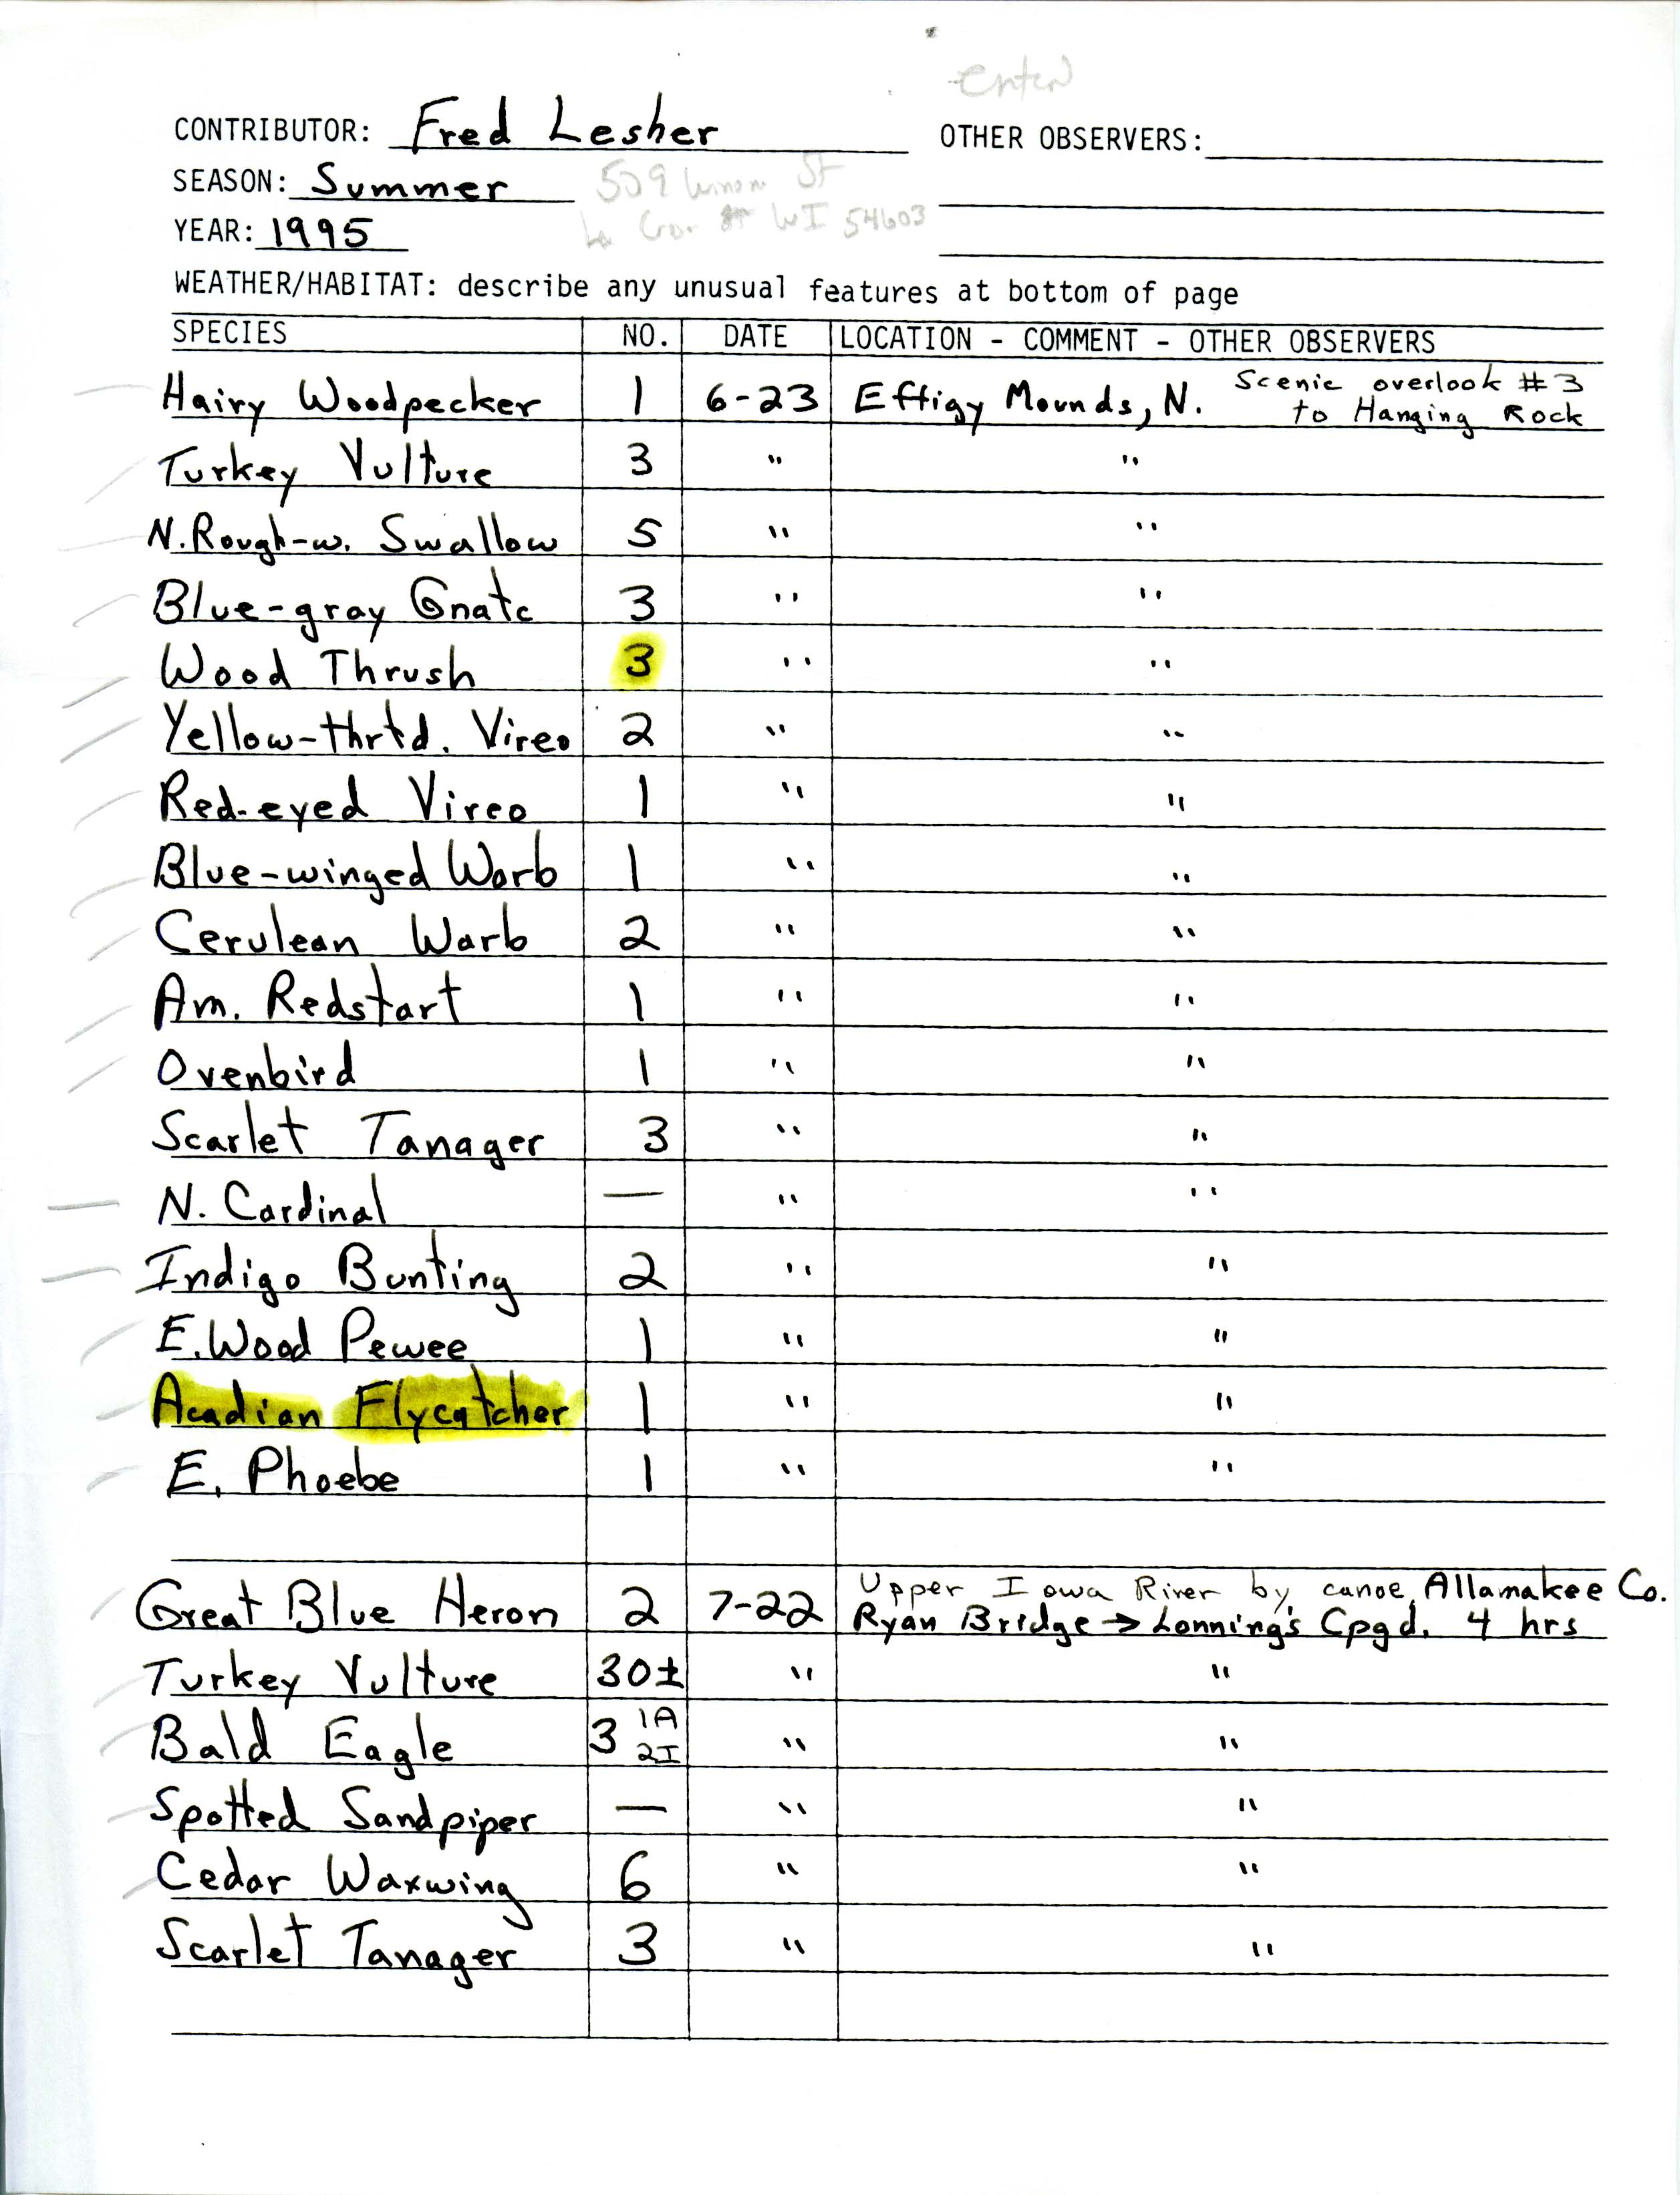 Field reports form for submitting seasonal observations of Iowa birds, summer 1995, Fred Lesher